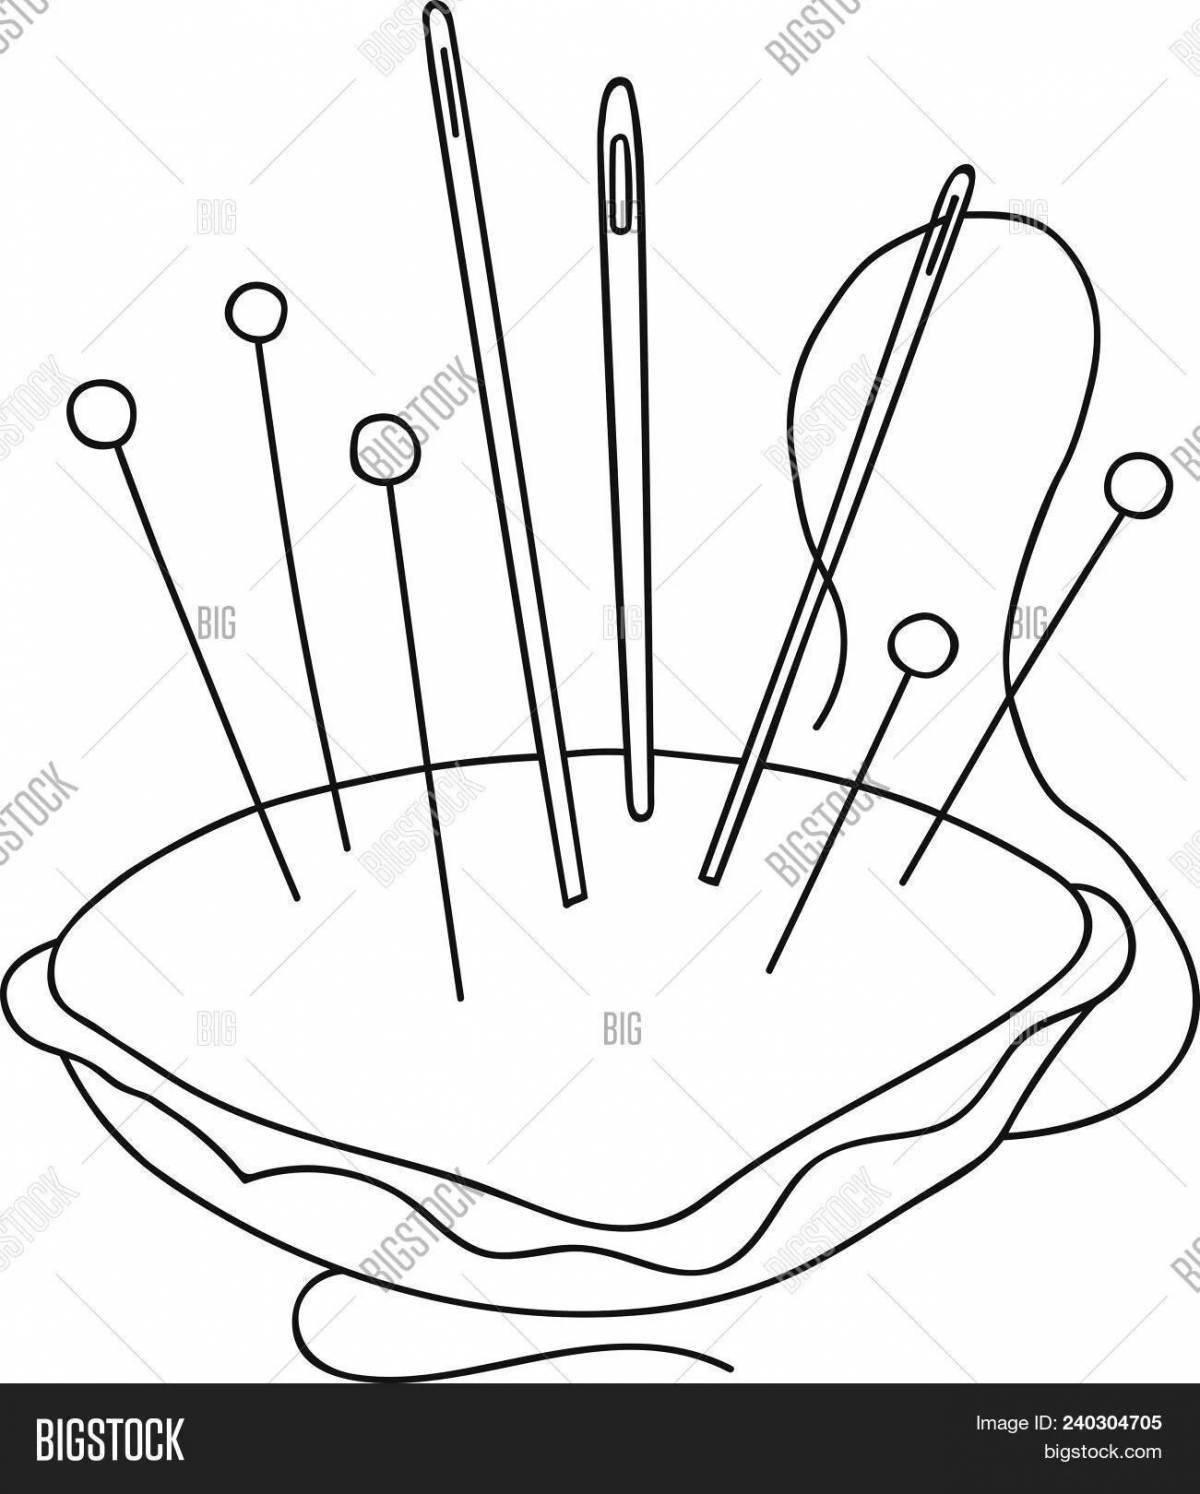 Creative needle coloring page for kids